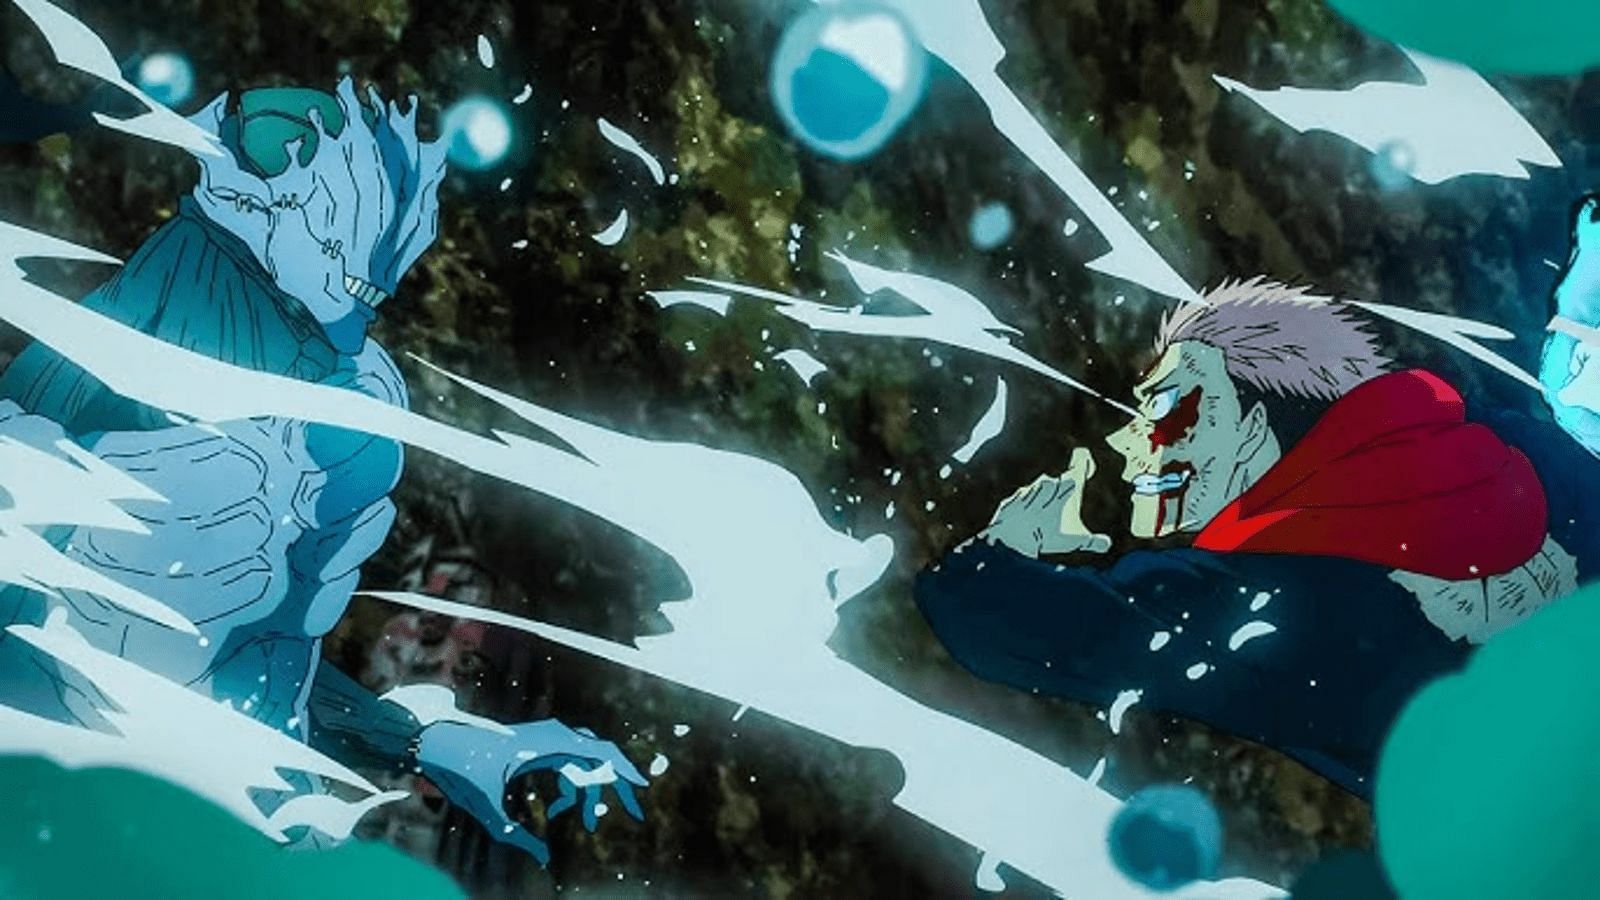 Yuji Itadori vs Mahito featured some of the most satisfying punches in anime (image via MAPPA)